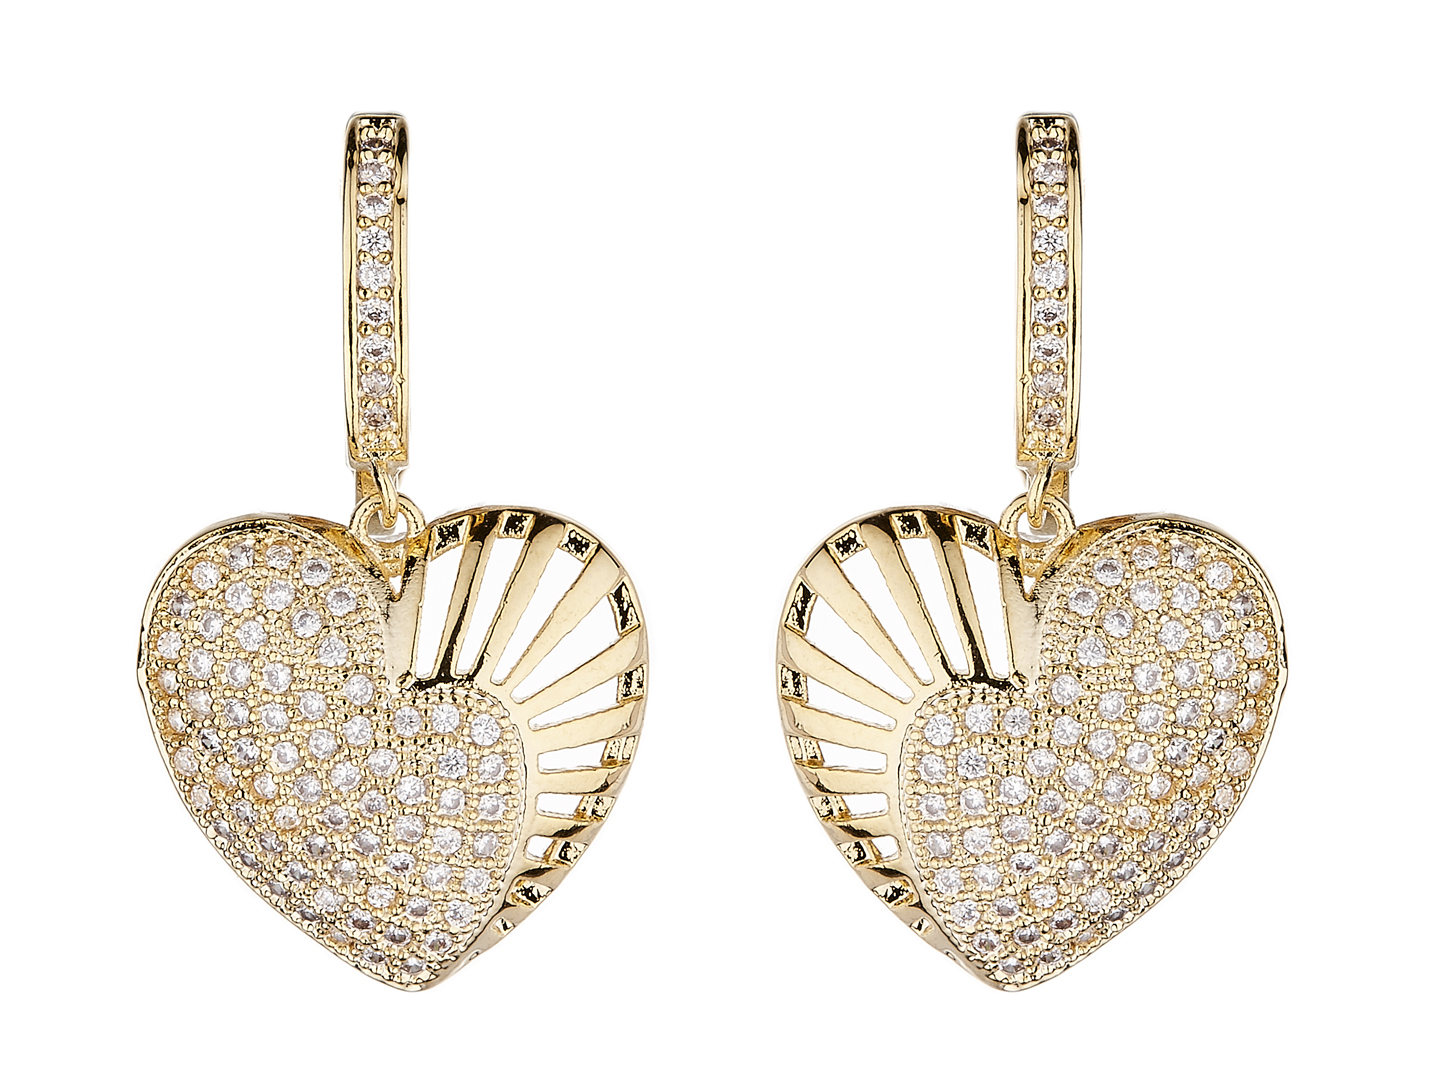 Clip On Earrings - Nafisa G - gold heart earring with clear cubic zirconia crystals